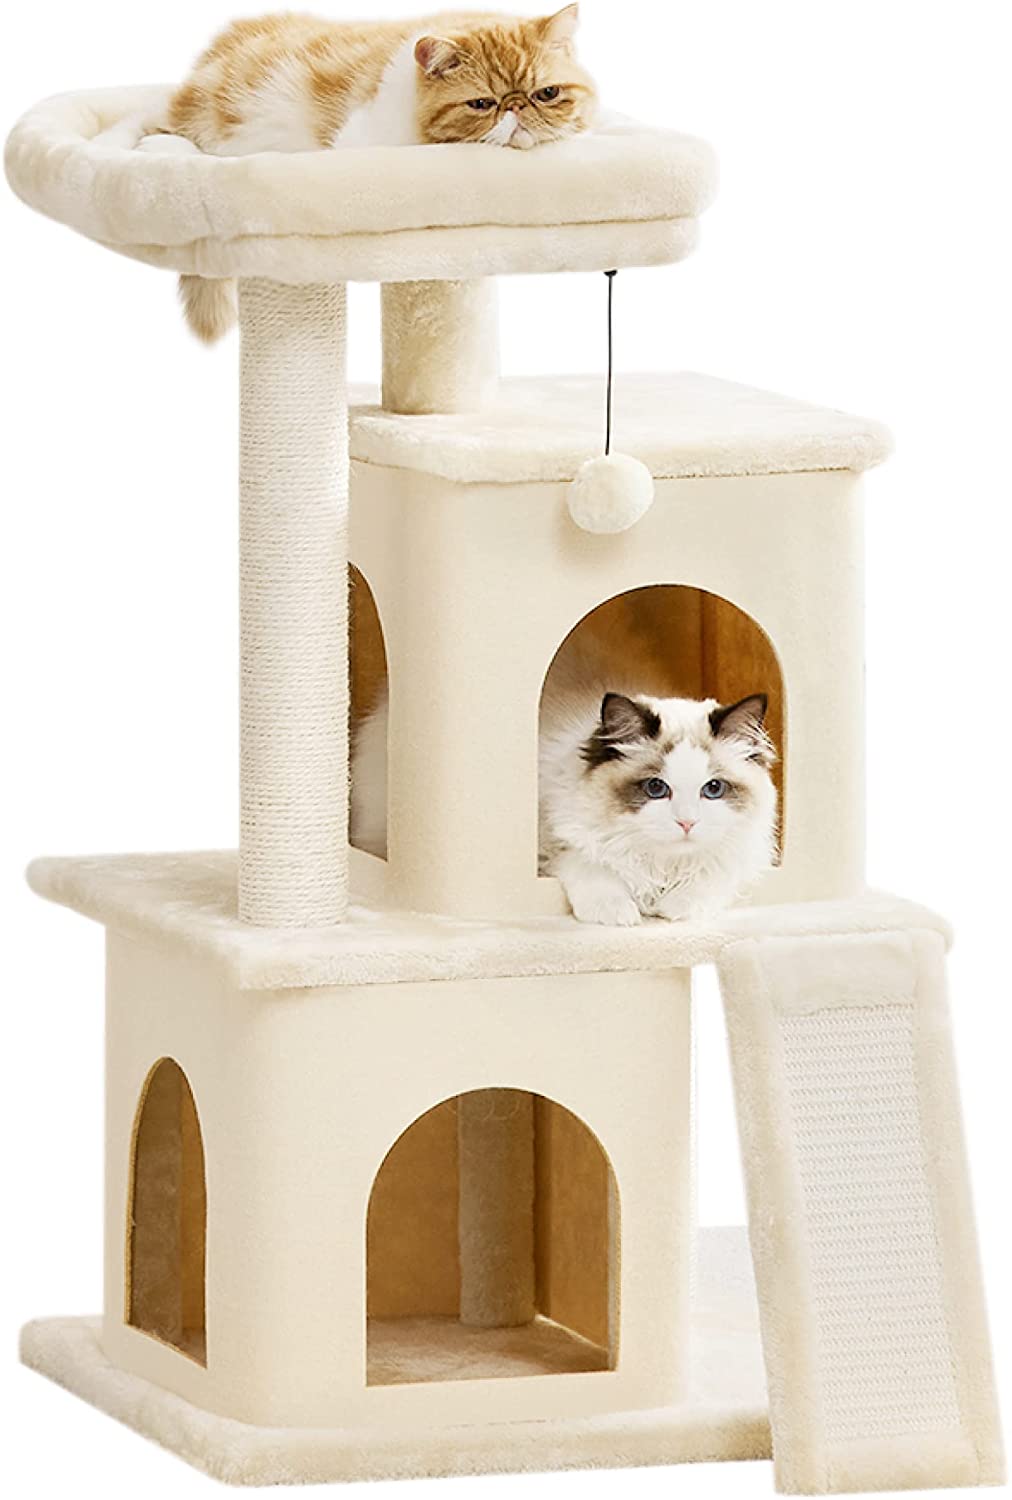 Bedsure Multi-Level Cat Tree for Indoor Cats $32.99